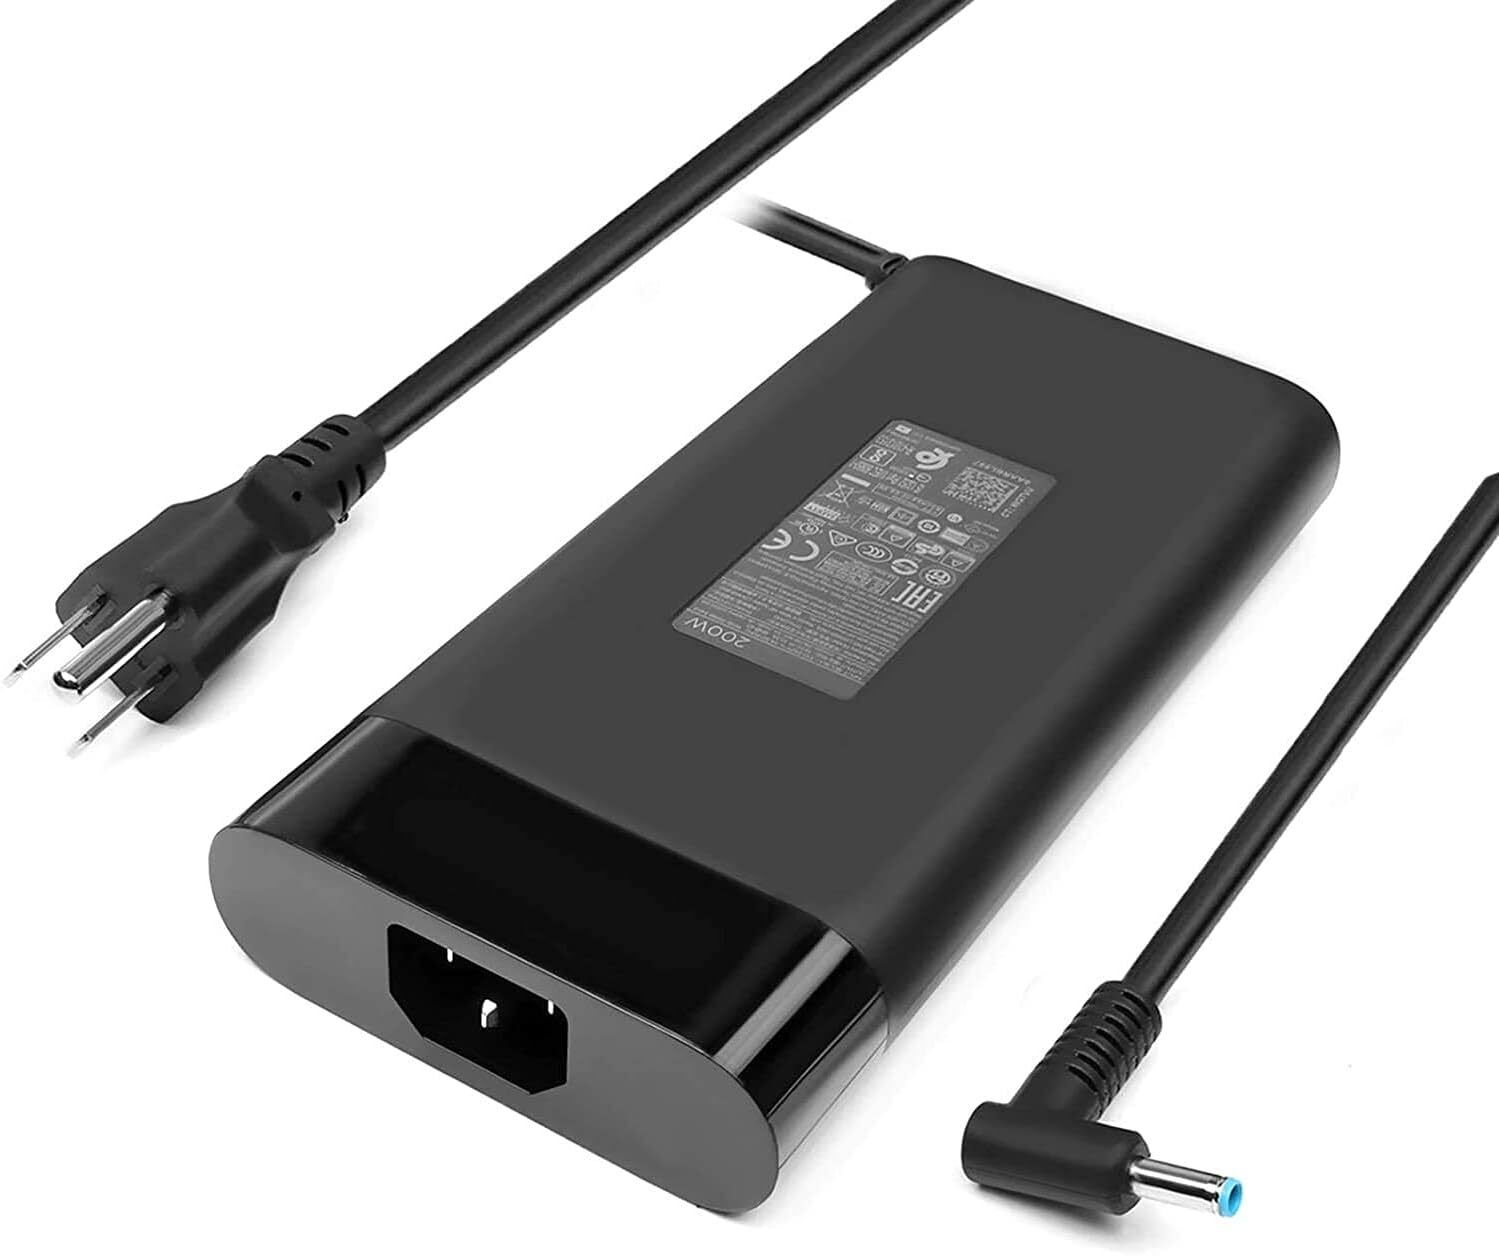 200W 10.3A AC Charger Fit for HP Omen 15 17 15t 17t Zbook 15 17 G7 L00818-850 